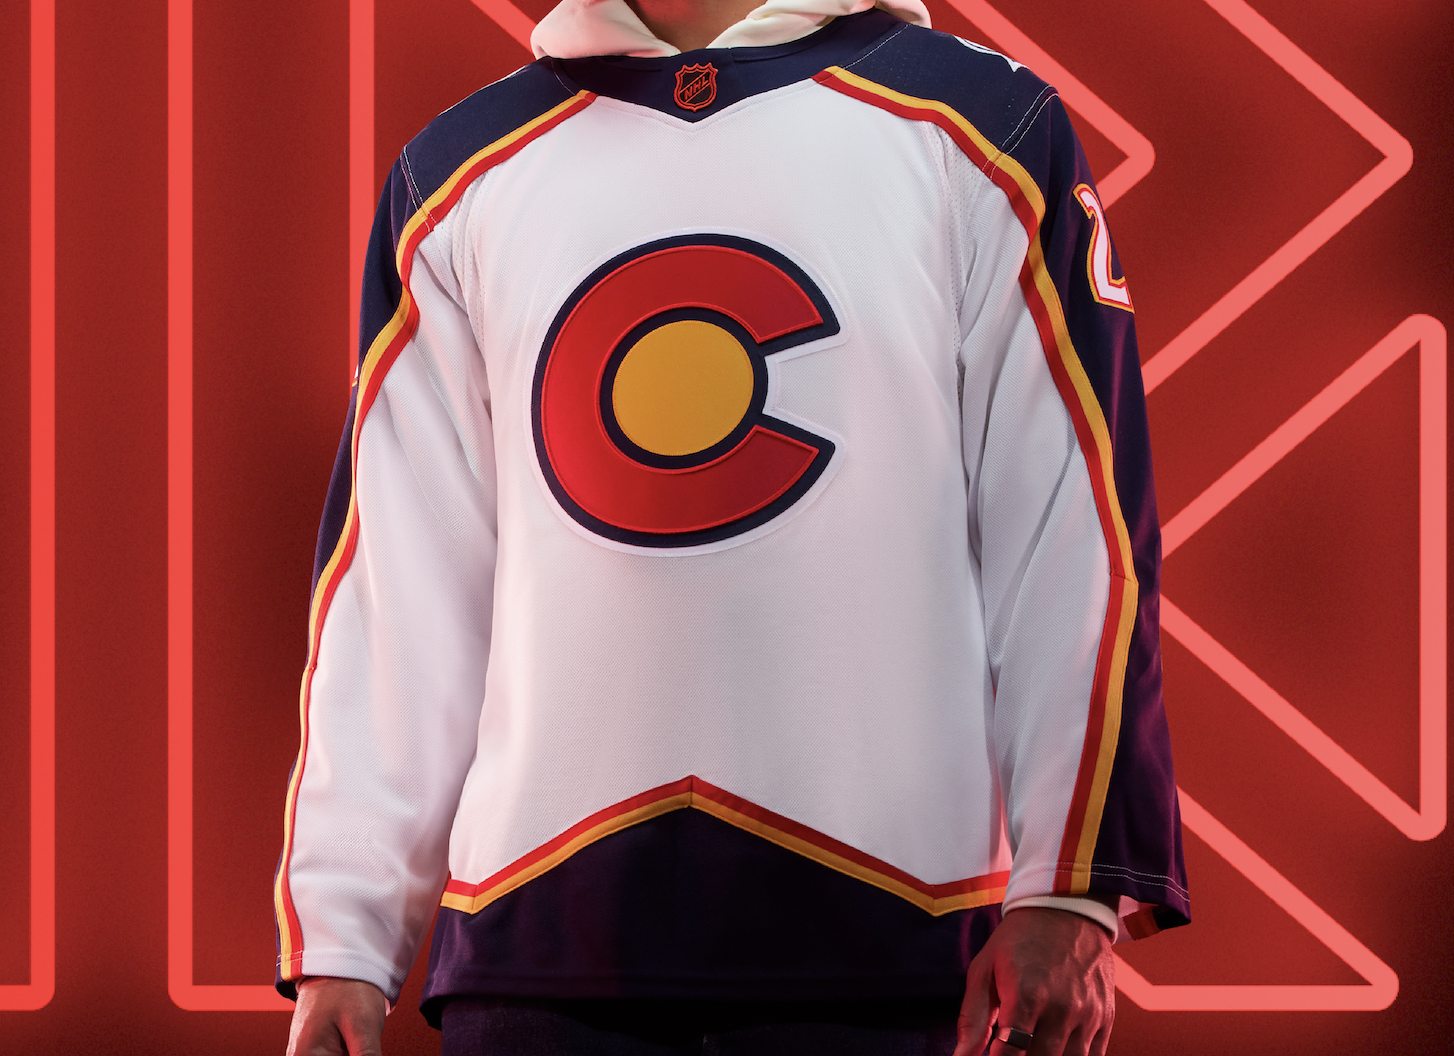 We’re really proud of this jersey. Our team did an excellent job of incorporating the iconic state flag and paying homage to the Rocky Mountains. A design that’s worthy of the defending champs.